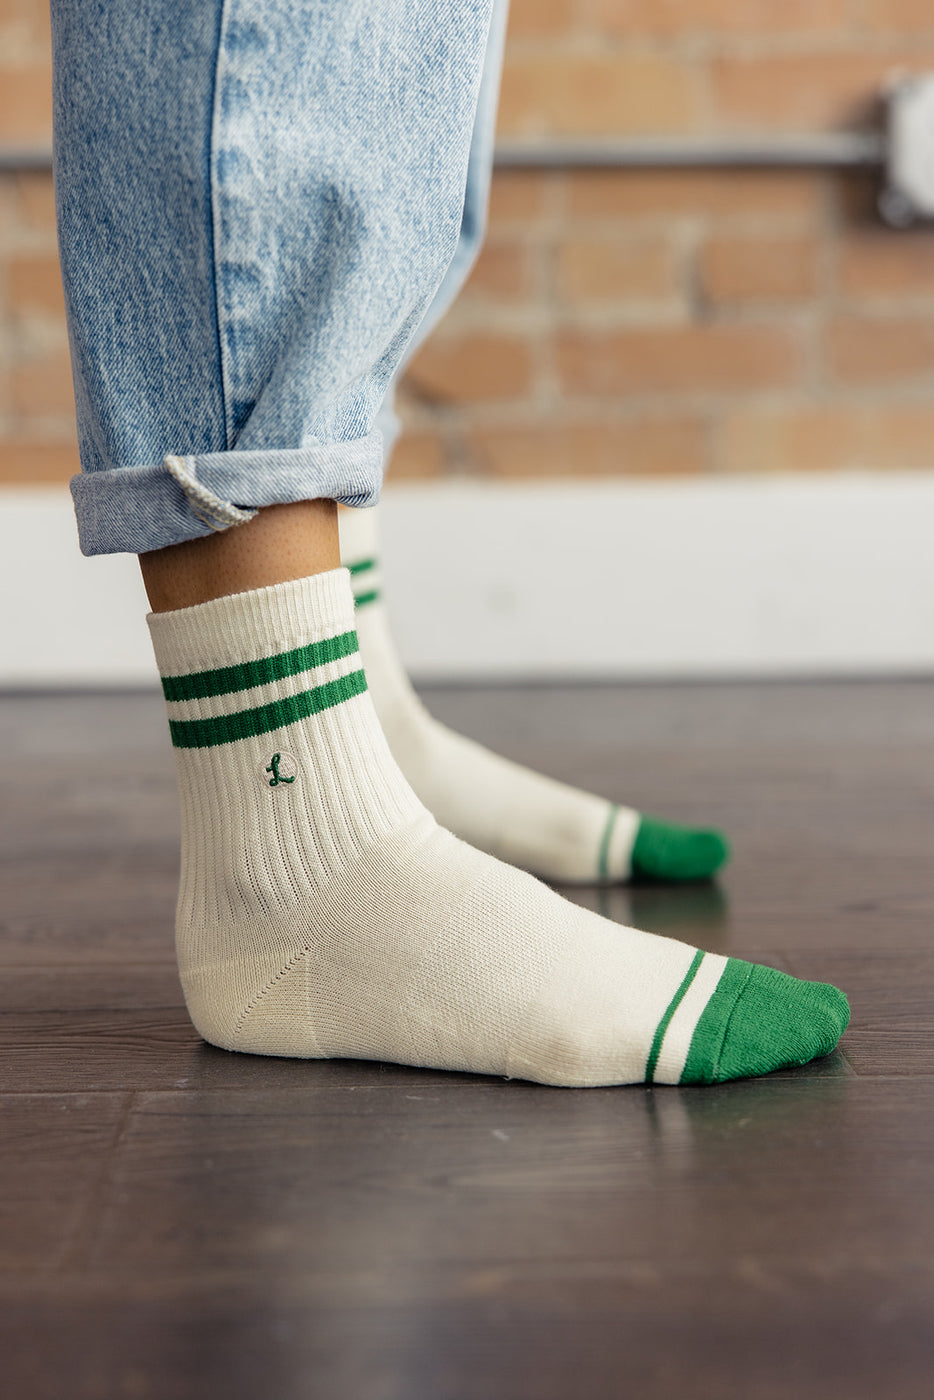 a person wearing white and green socks